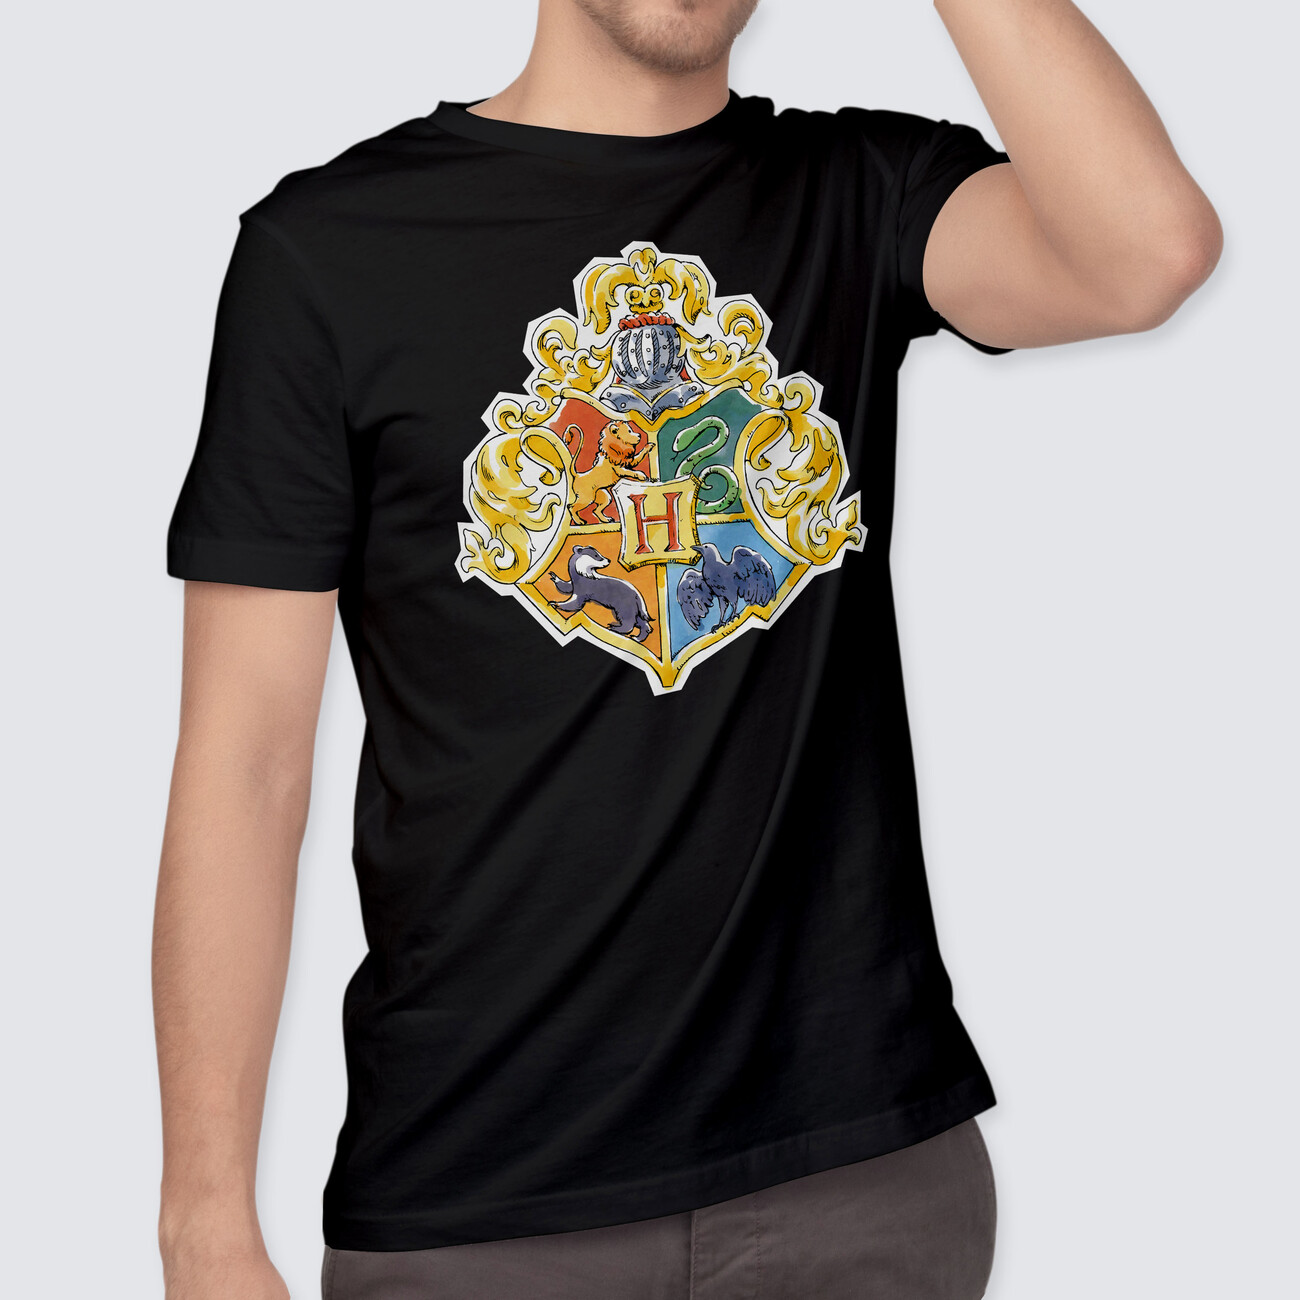 and | Clothes Potter Hogwarts Crest Harry fans merchandise for - accessories